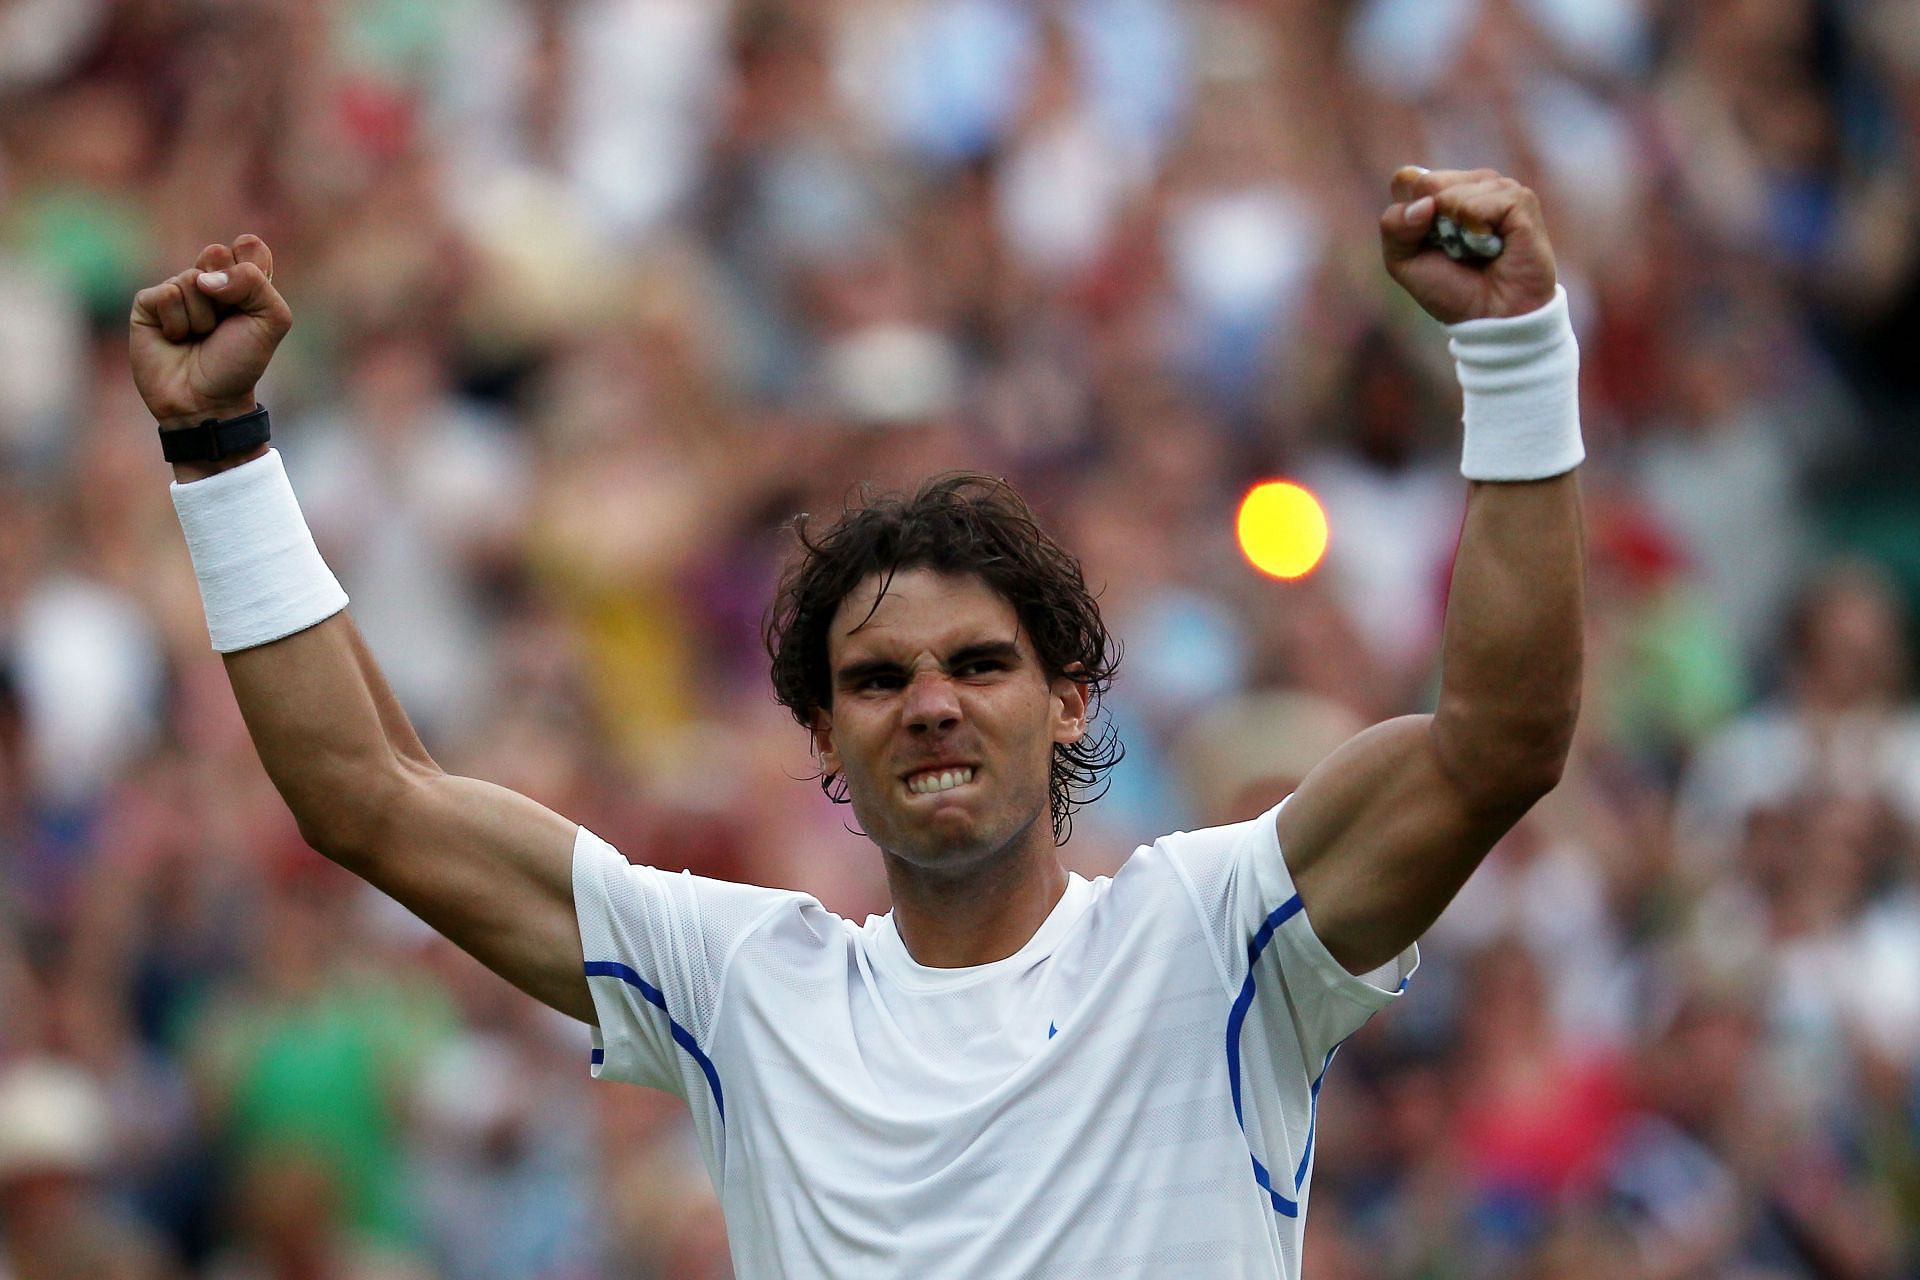 Rafael Nadal will most likely make the trip to Wimbledon at the end of the month